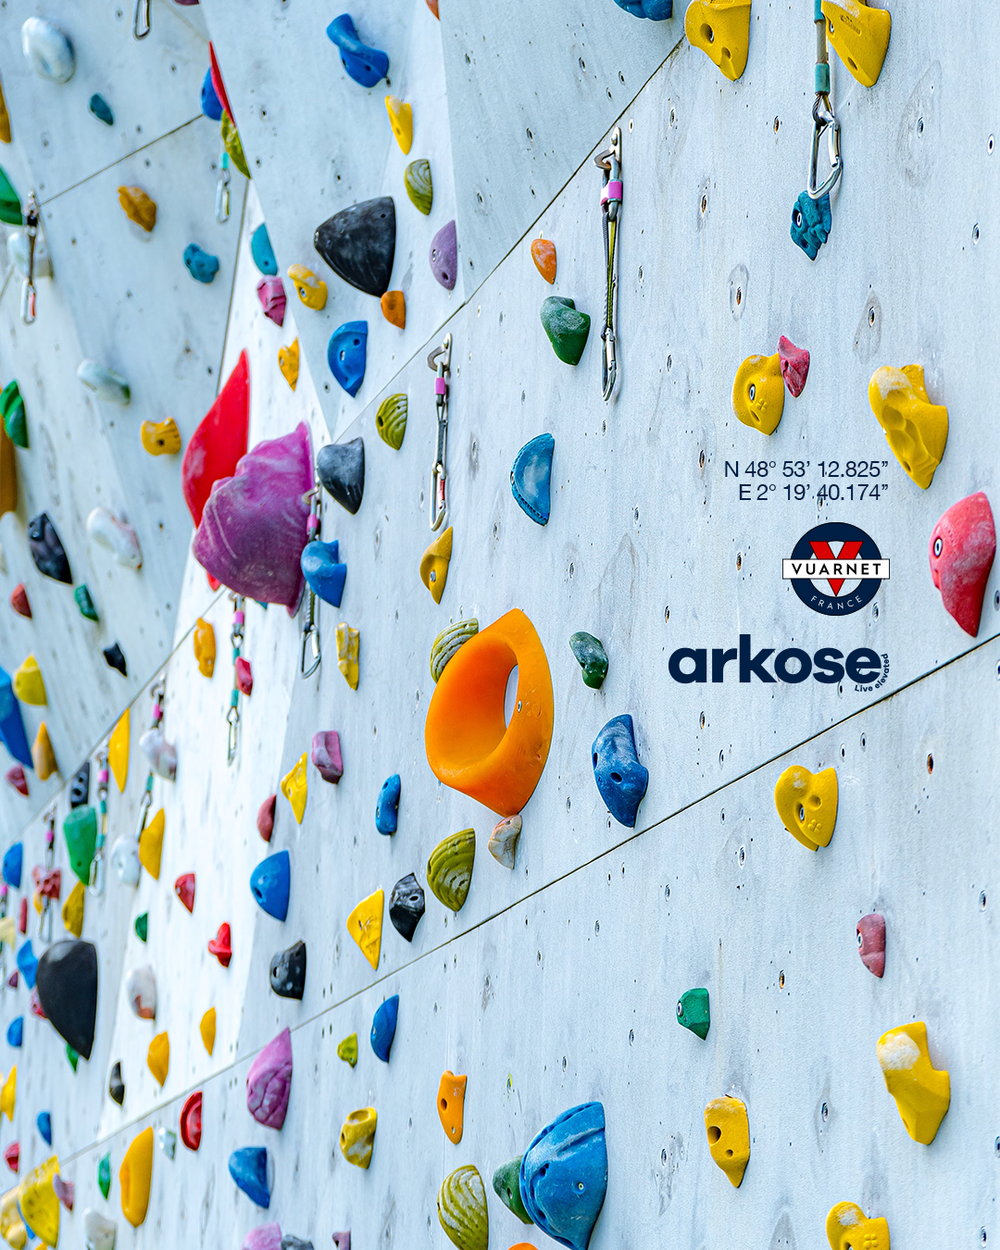 Win a climbing session with Vuarnet, Solenne Piret and Jon Glassberg!